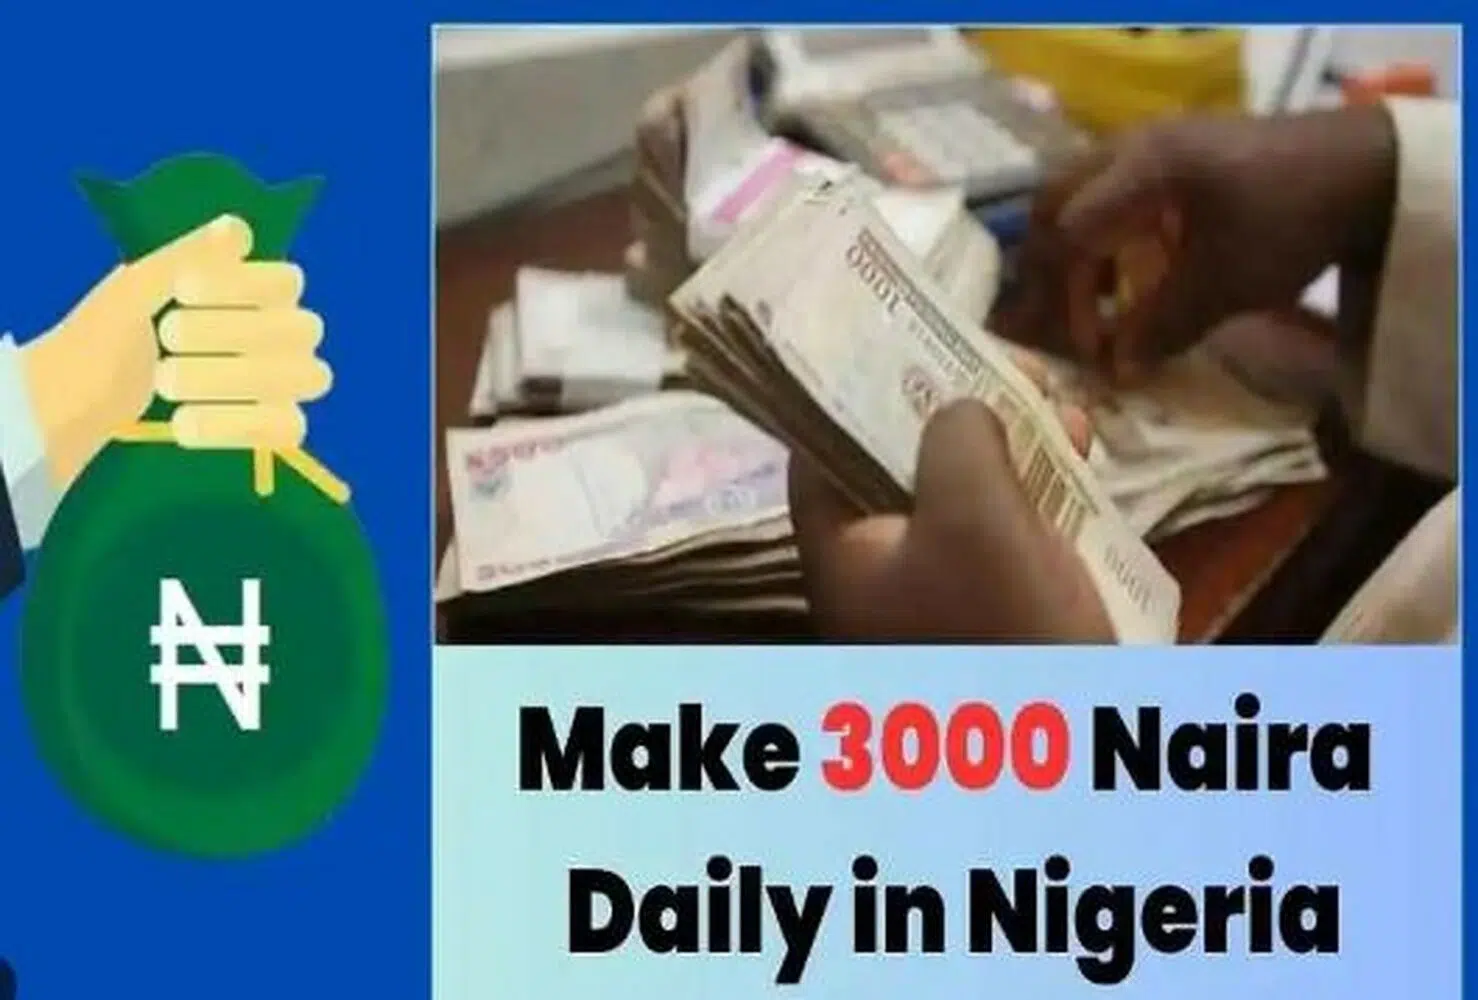 15 Profitable Business Ideas to Earn 3K Daily in Nigeria Today